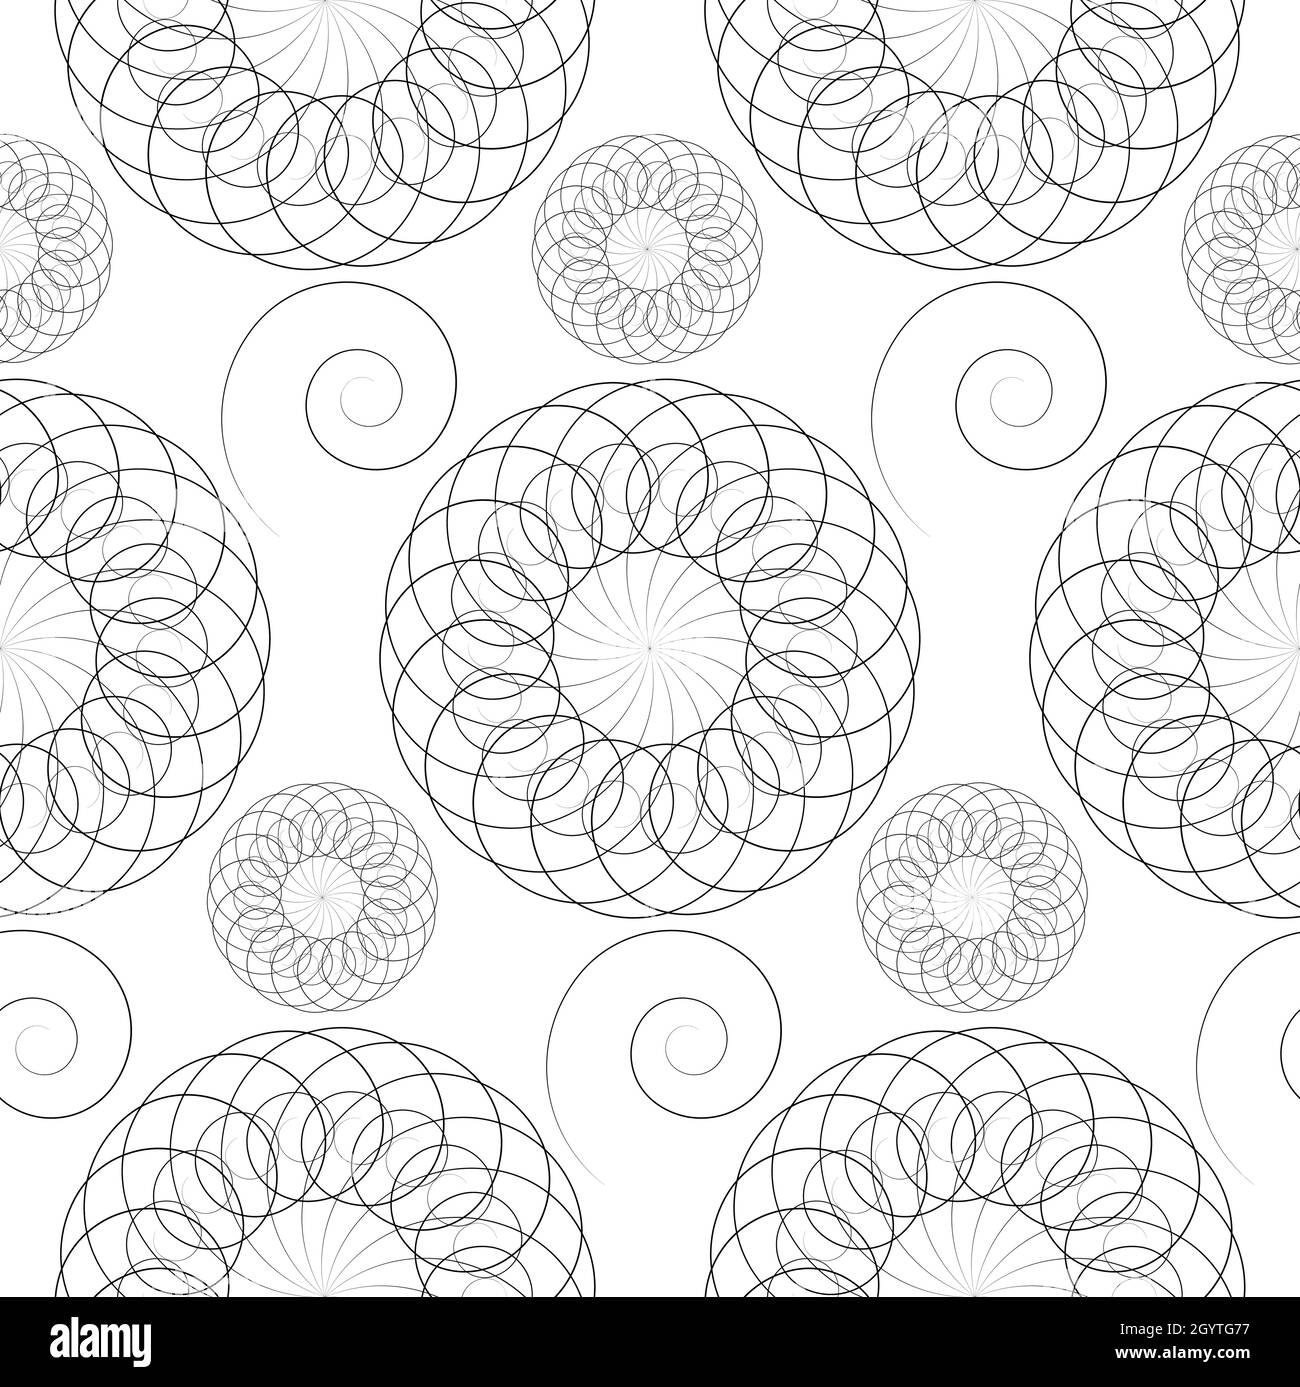 Decorative floral print Black and White Stock Photos & Images - Alamy